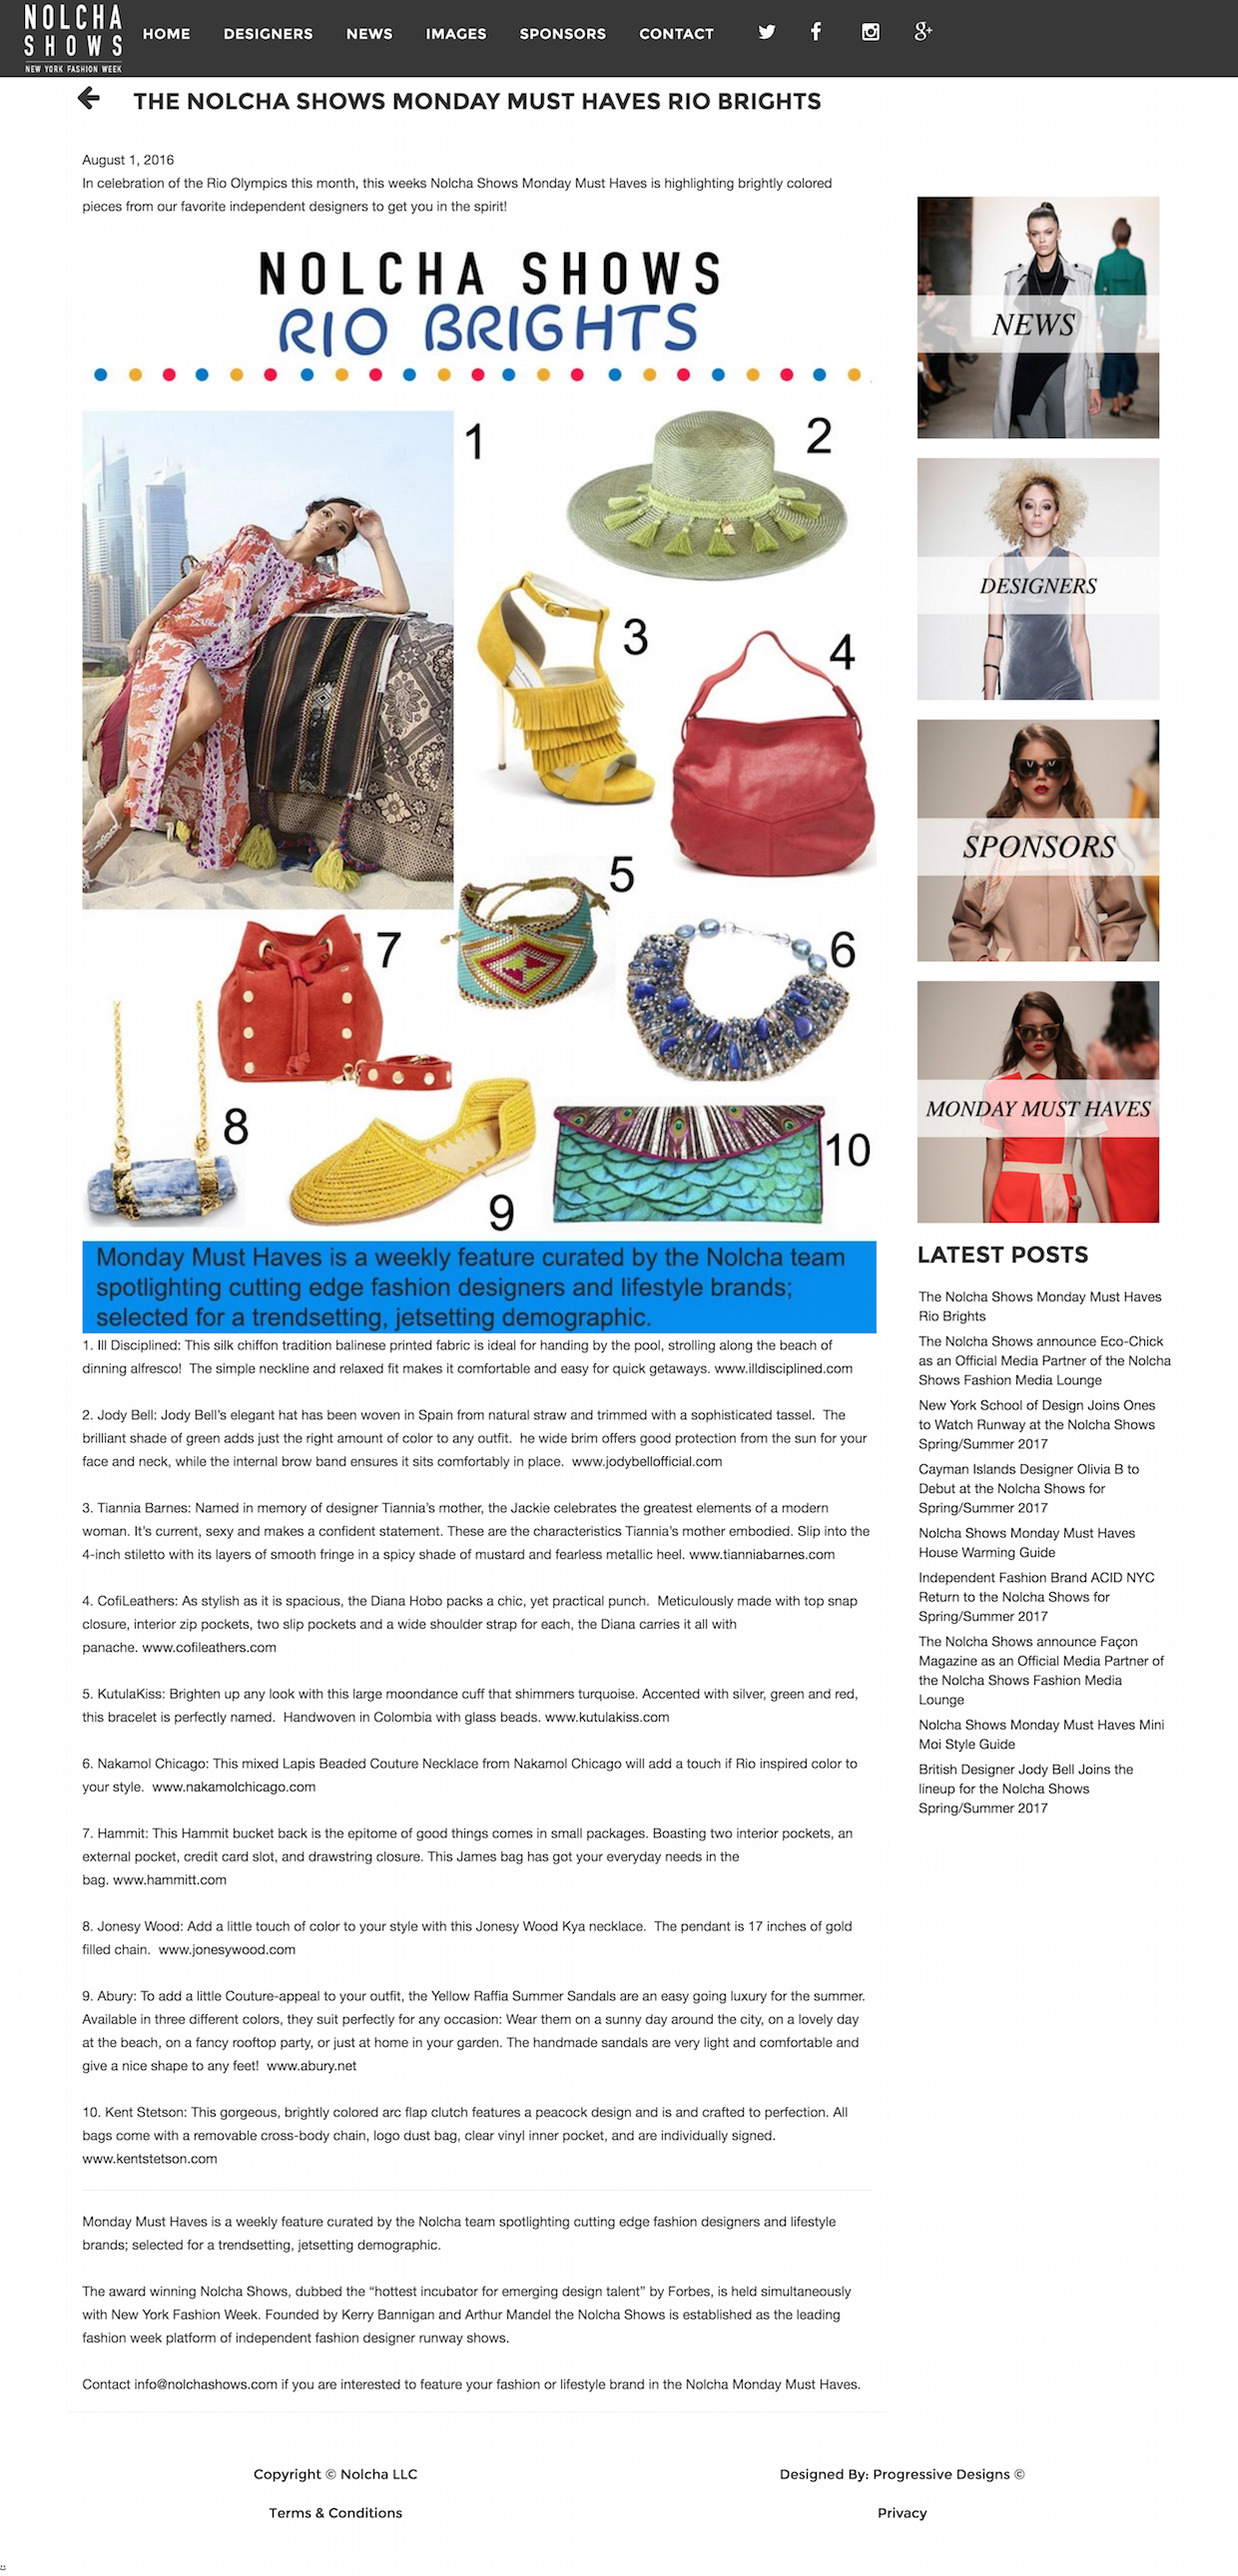 Yellow Raffia Sandals featured on Nolcha Shows Blog